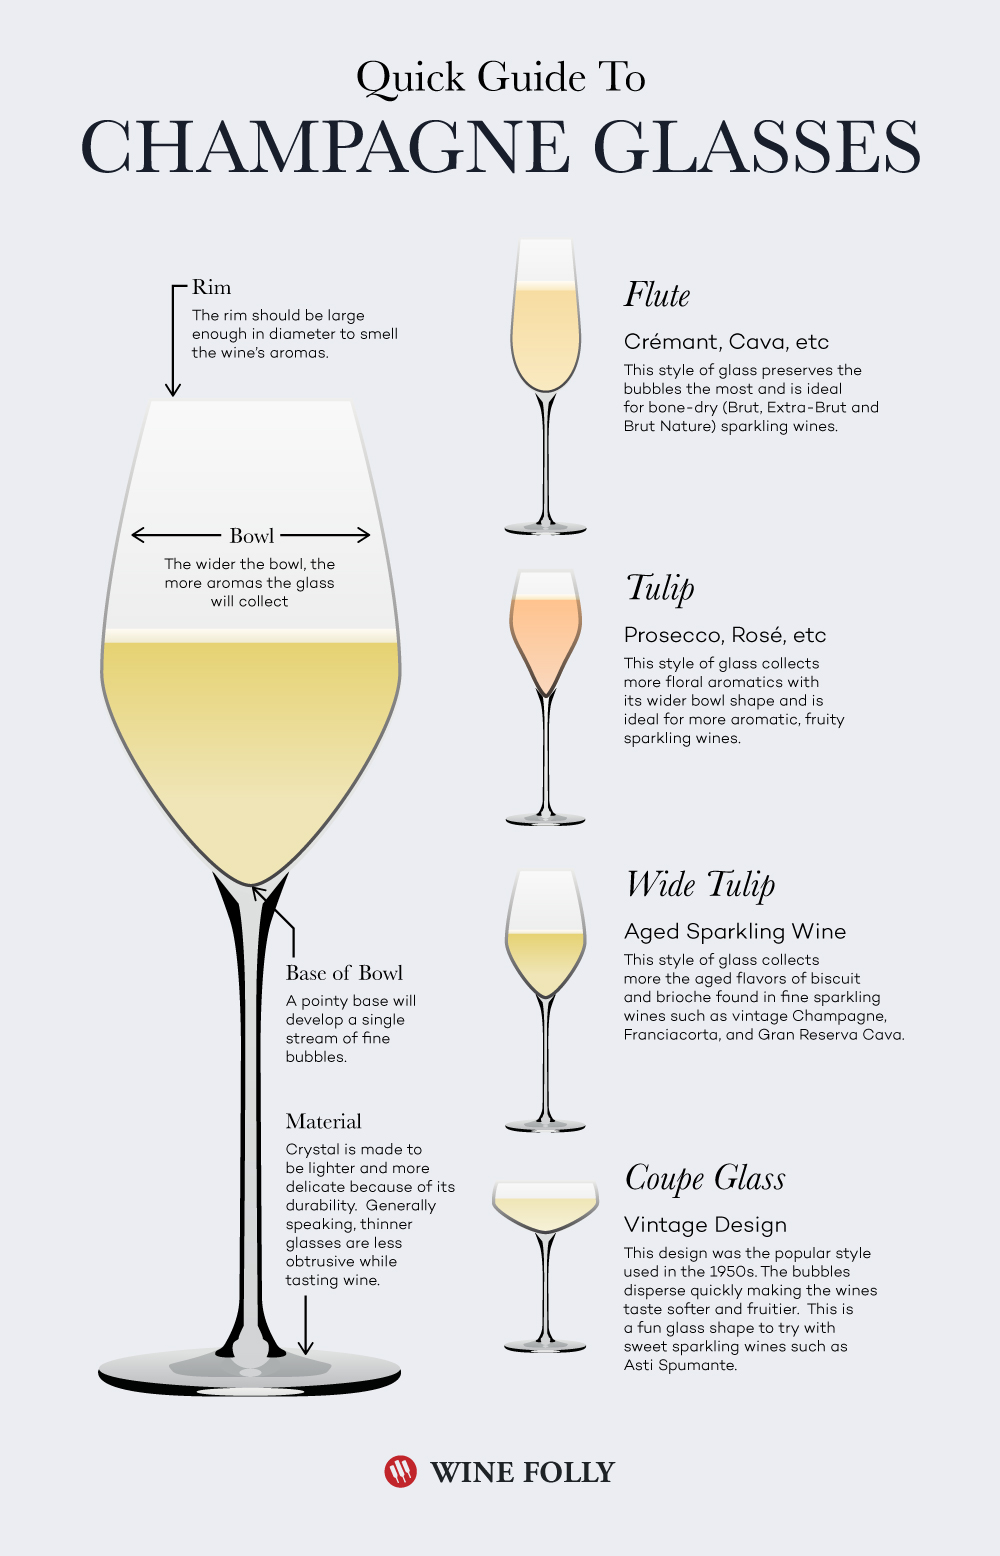 Tag væk Ring tilbage vedholdende History & Overview of the Champagne Glass | Montemaggio